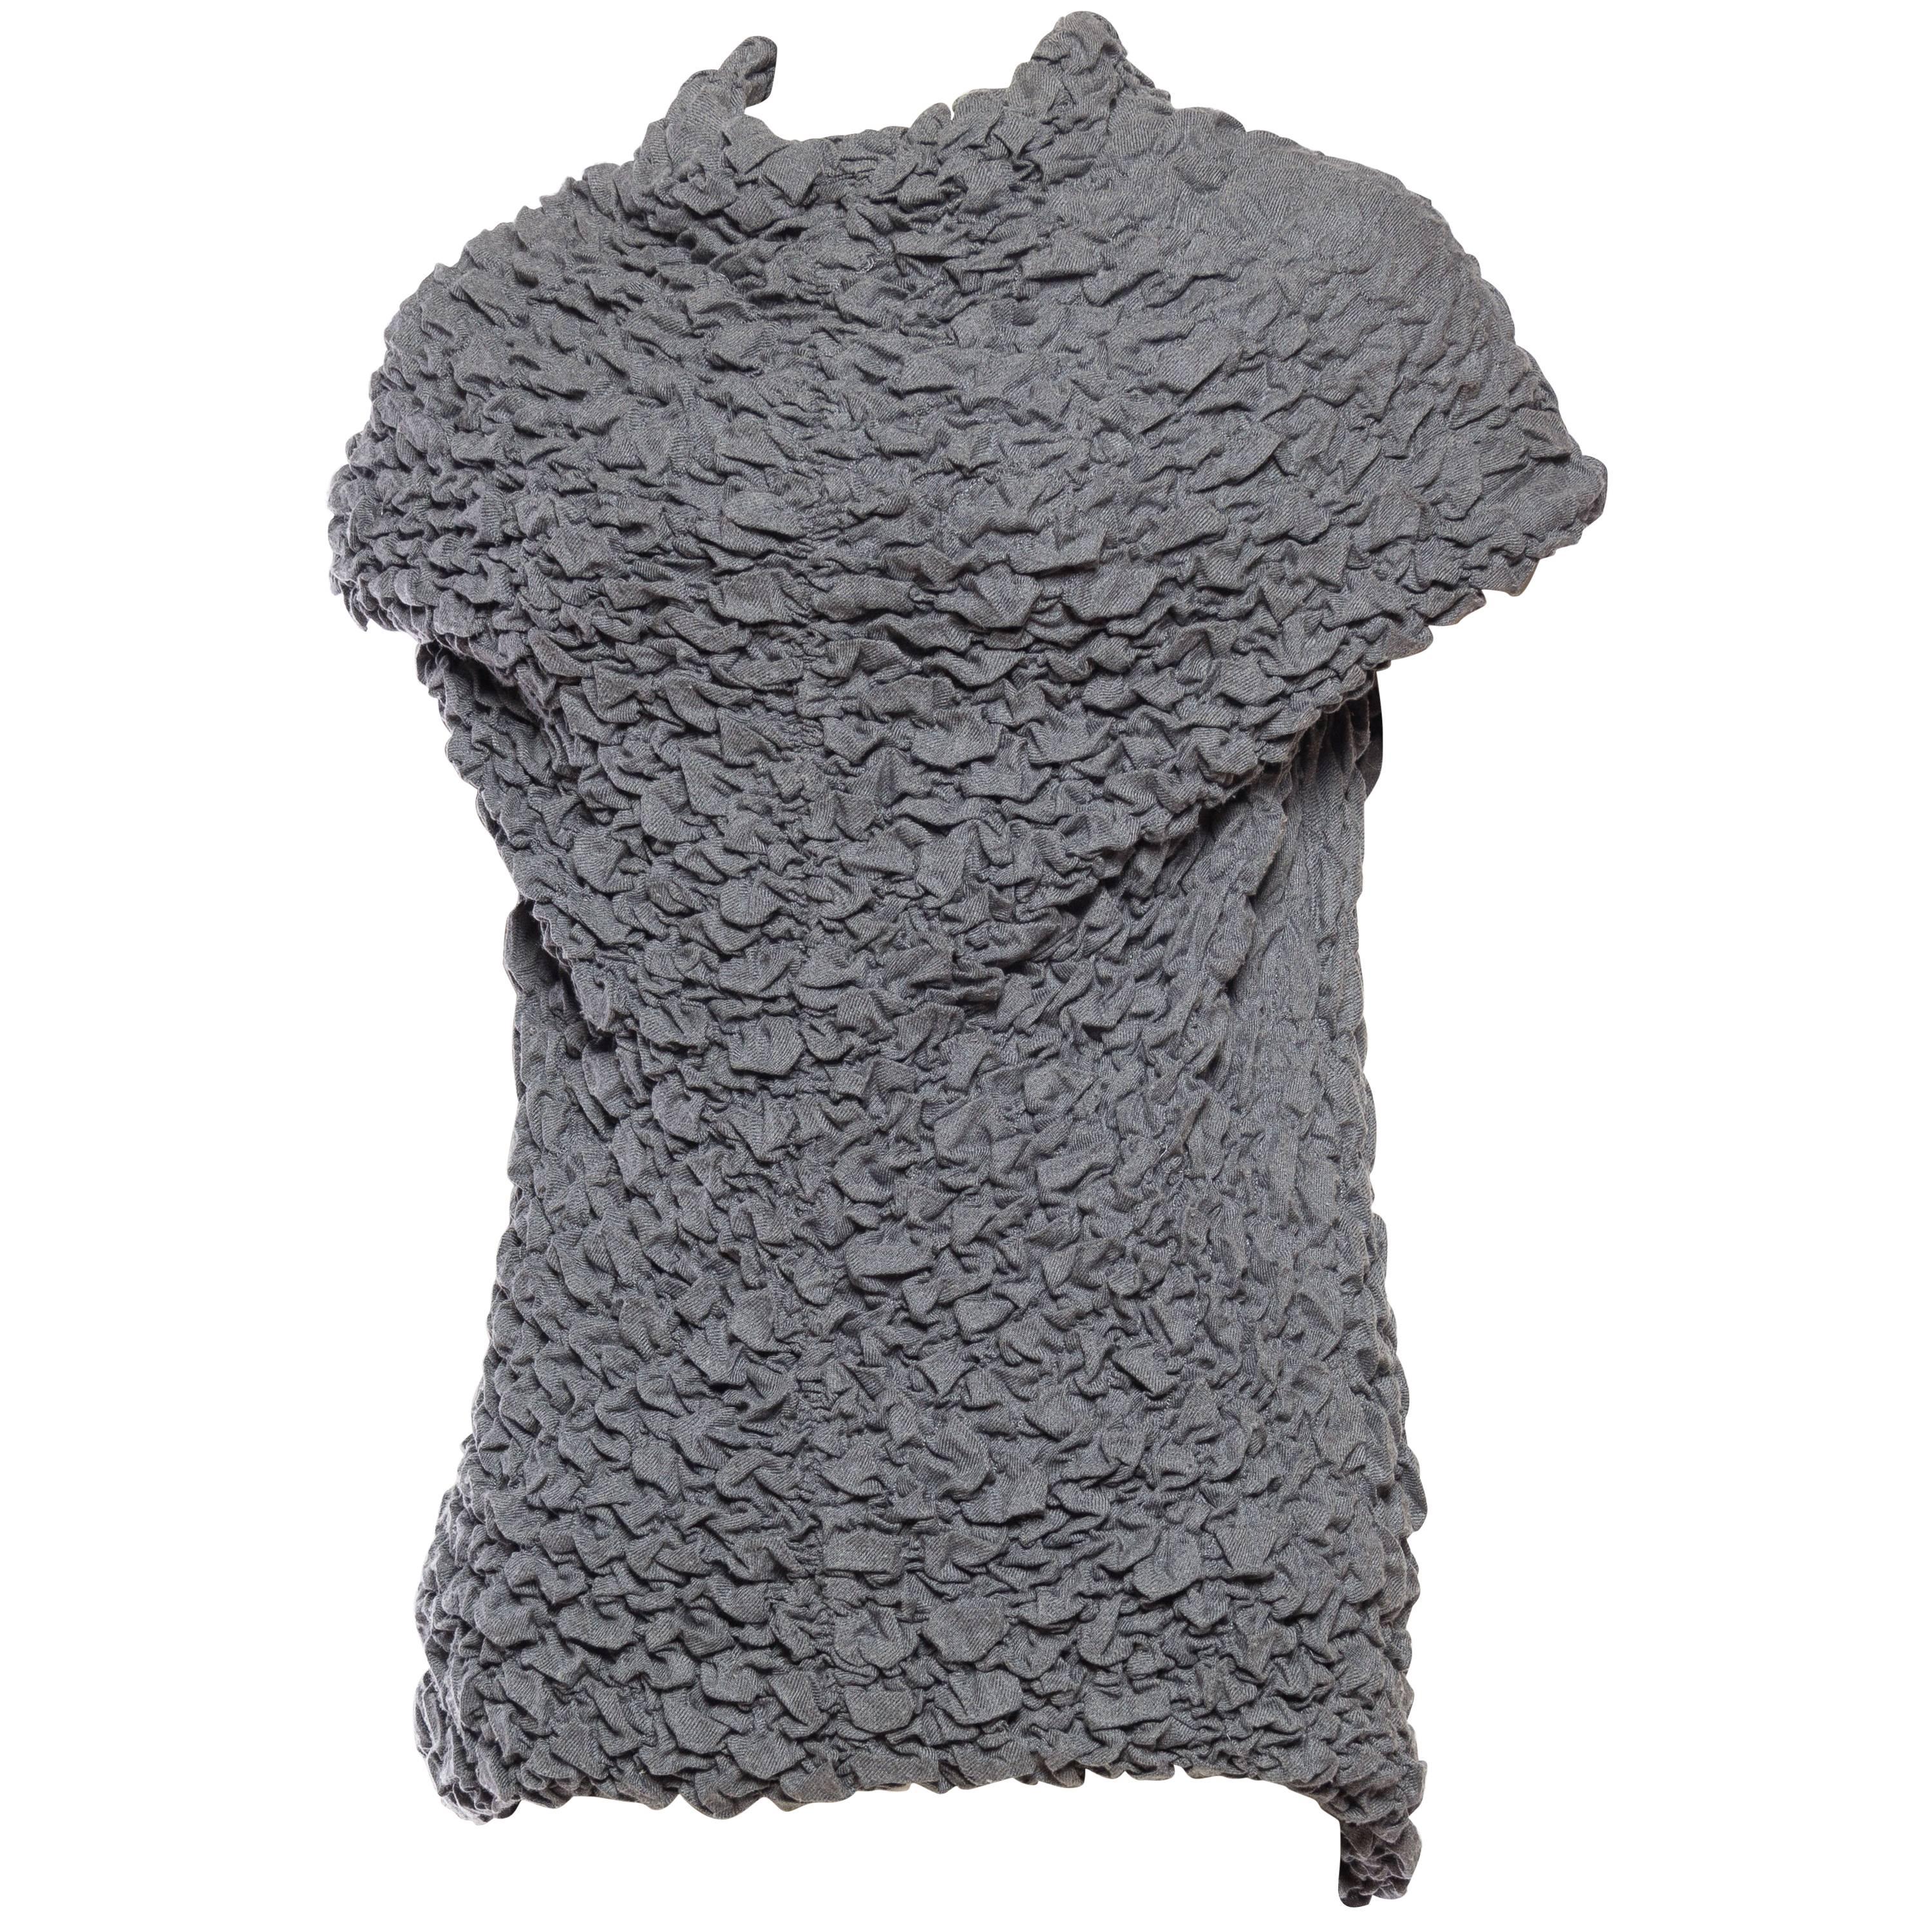 1990S ALEXANDER MCQUEEN Grey Textured Knit Top From Fall 1999 "The Overlook" Co